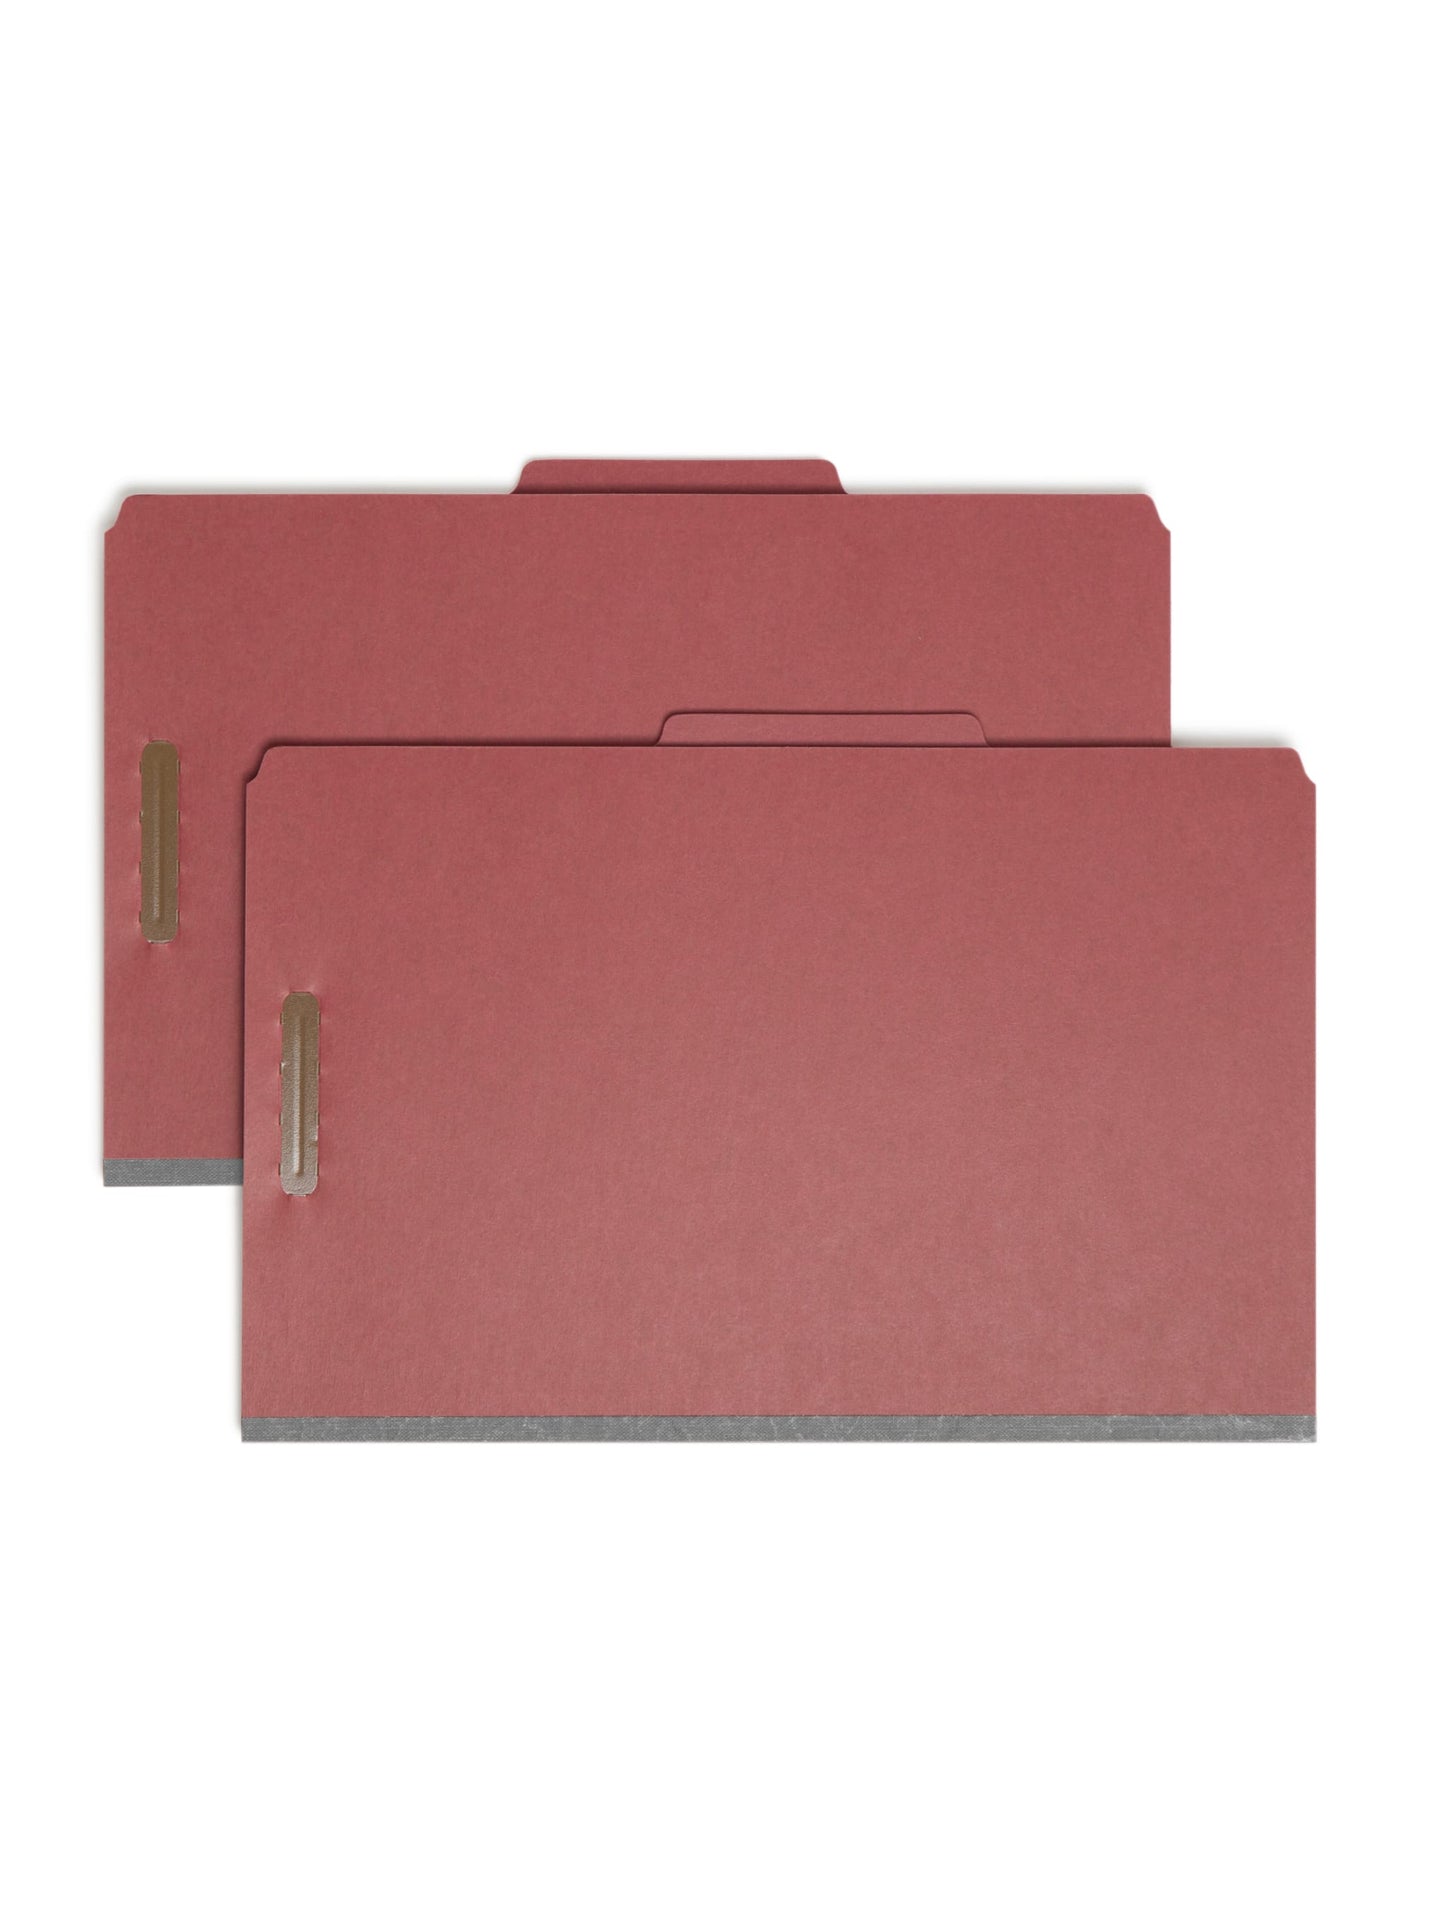 Pressboard Classification File Folders, 3 Dividers, 3 inch Expansion, Red Color, Legal Size, 